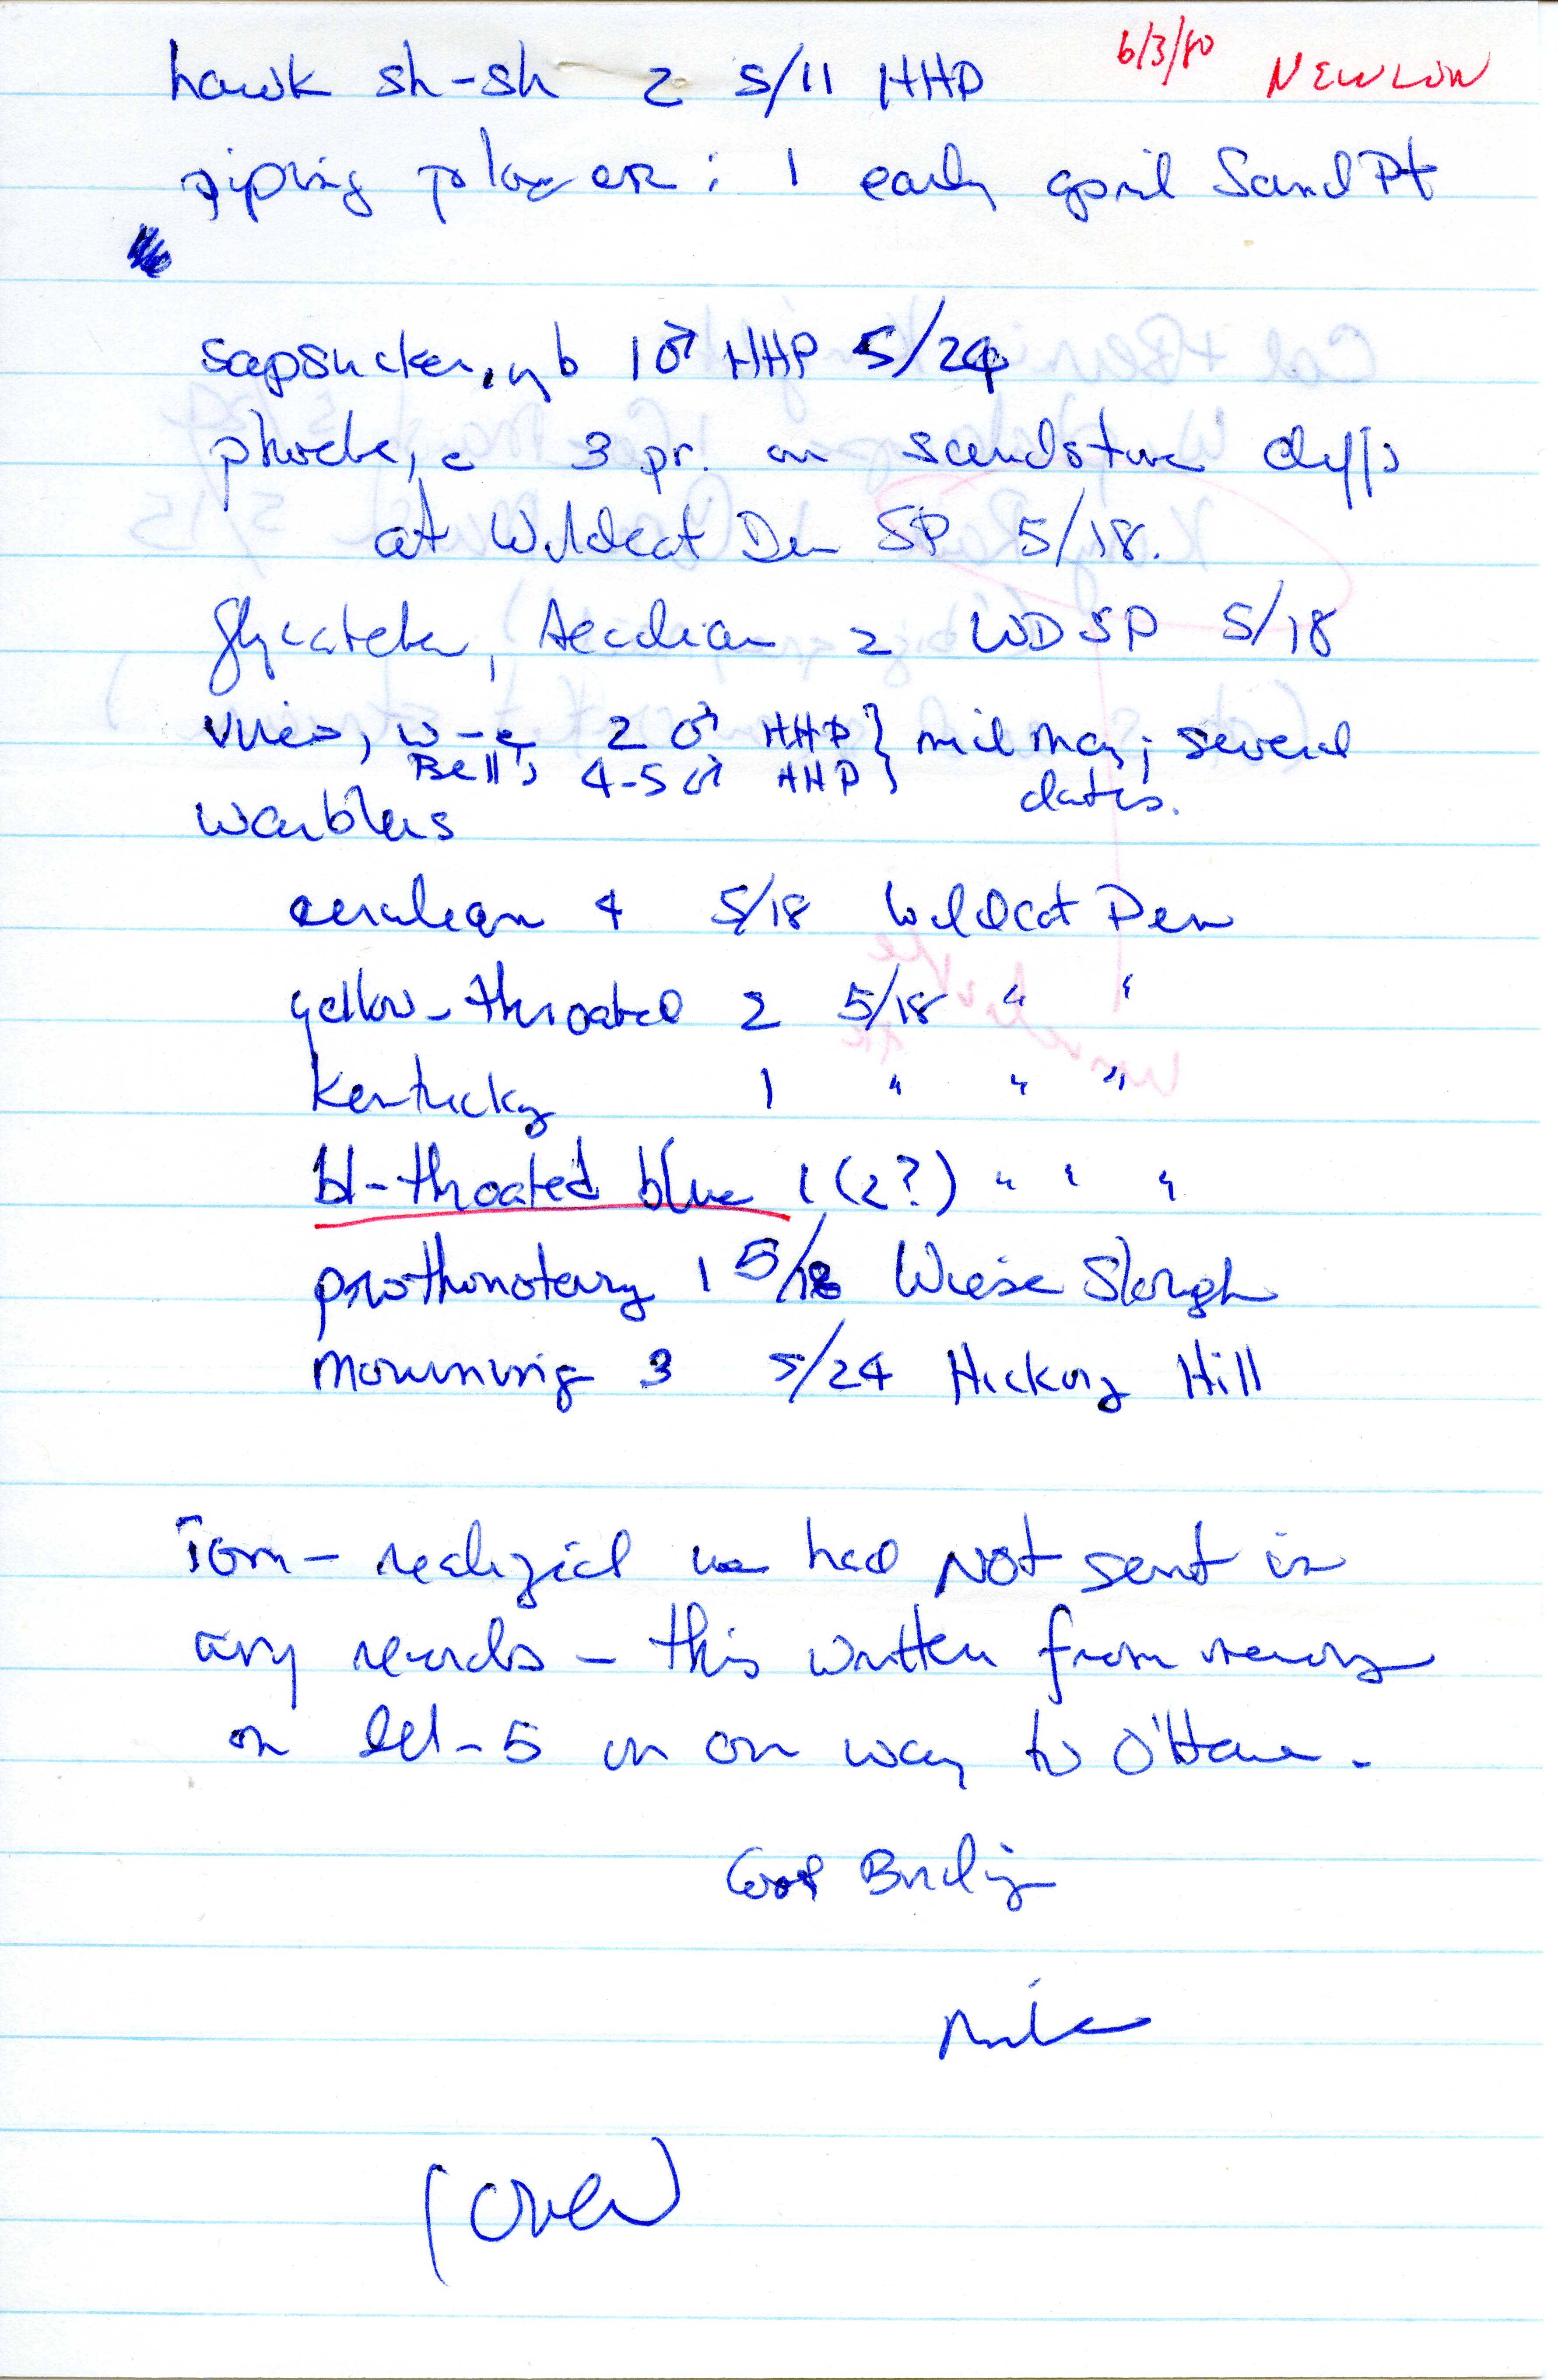 Field notes contributed by Michael C. Newlon, spring 1980